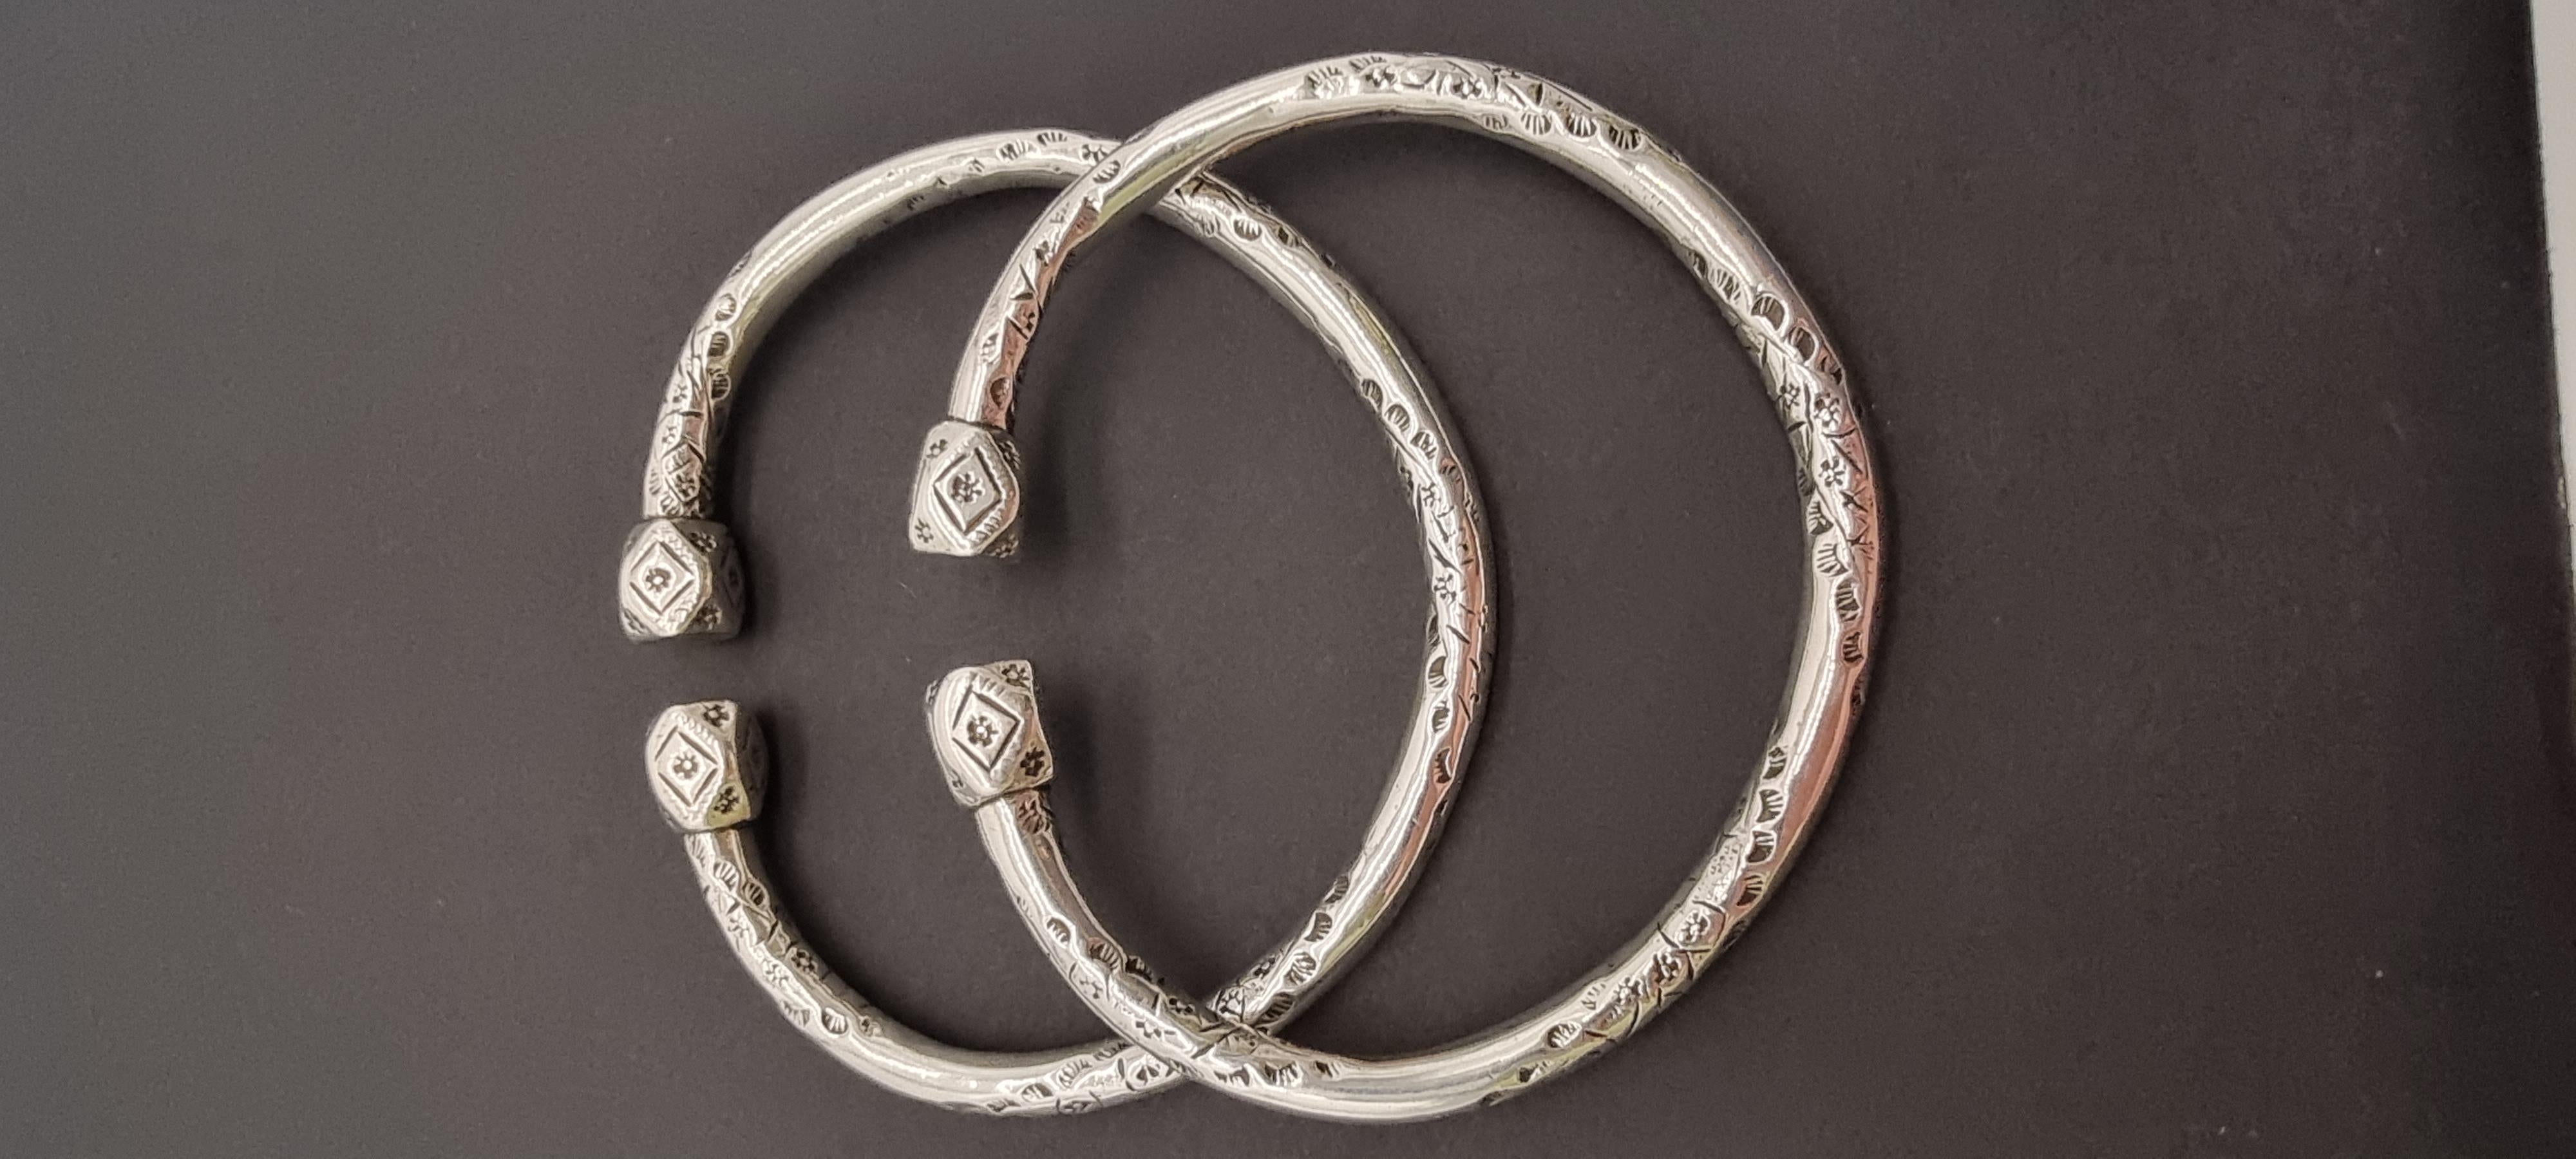 A pair of 19th century Portuguese solid silver arm bracelets 1